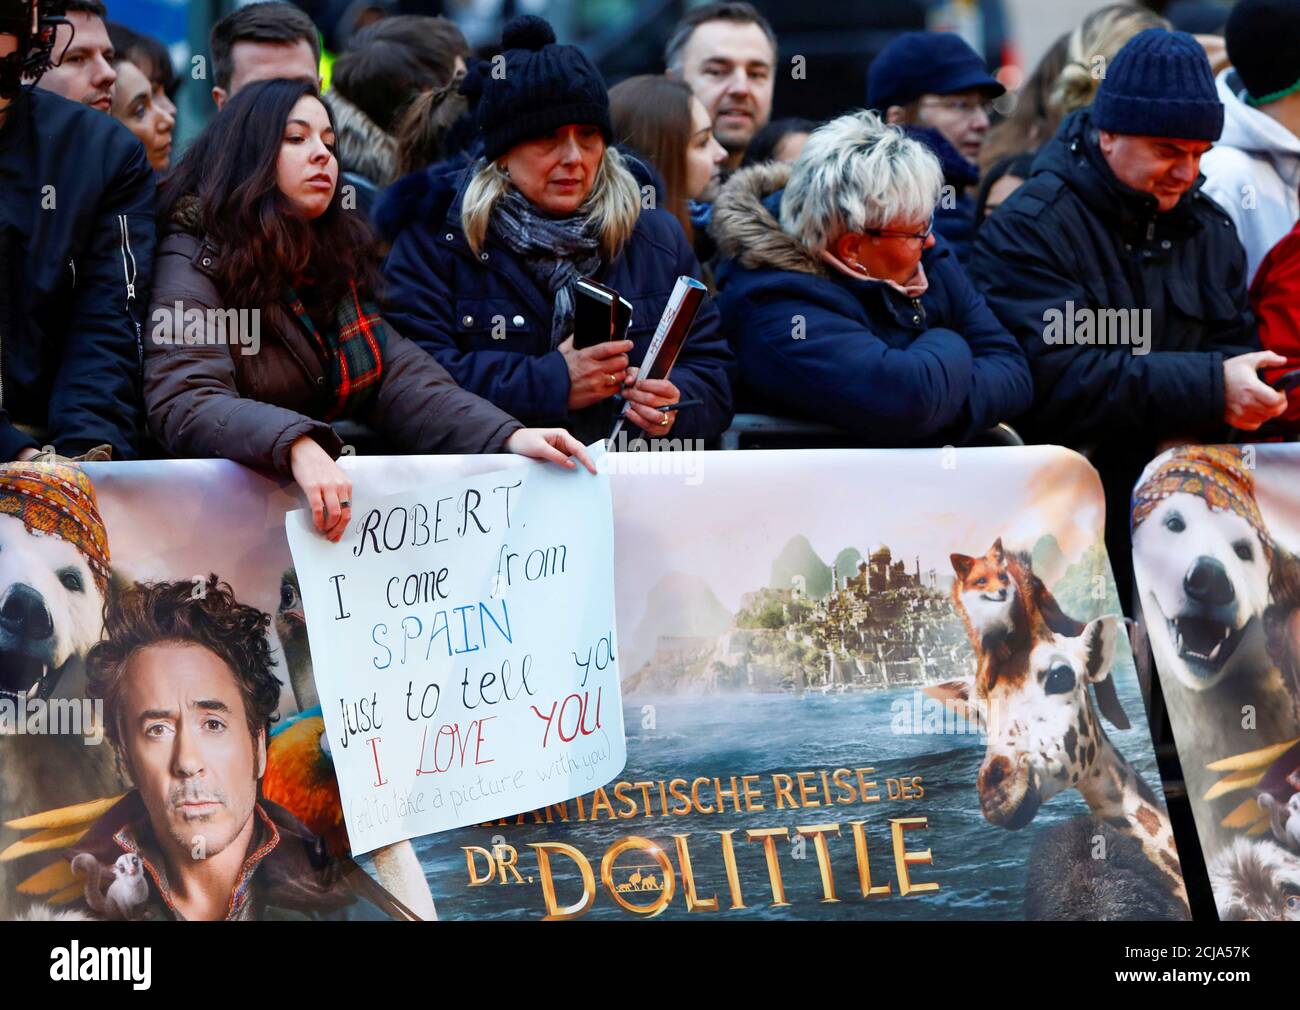 Fans gather ahead of the 'The Voyage of Doctor Dolittle' movie premiere in Berlin, Germany January 19, 2020.    REUTERS/Michele Tantussi Stock Photo